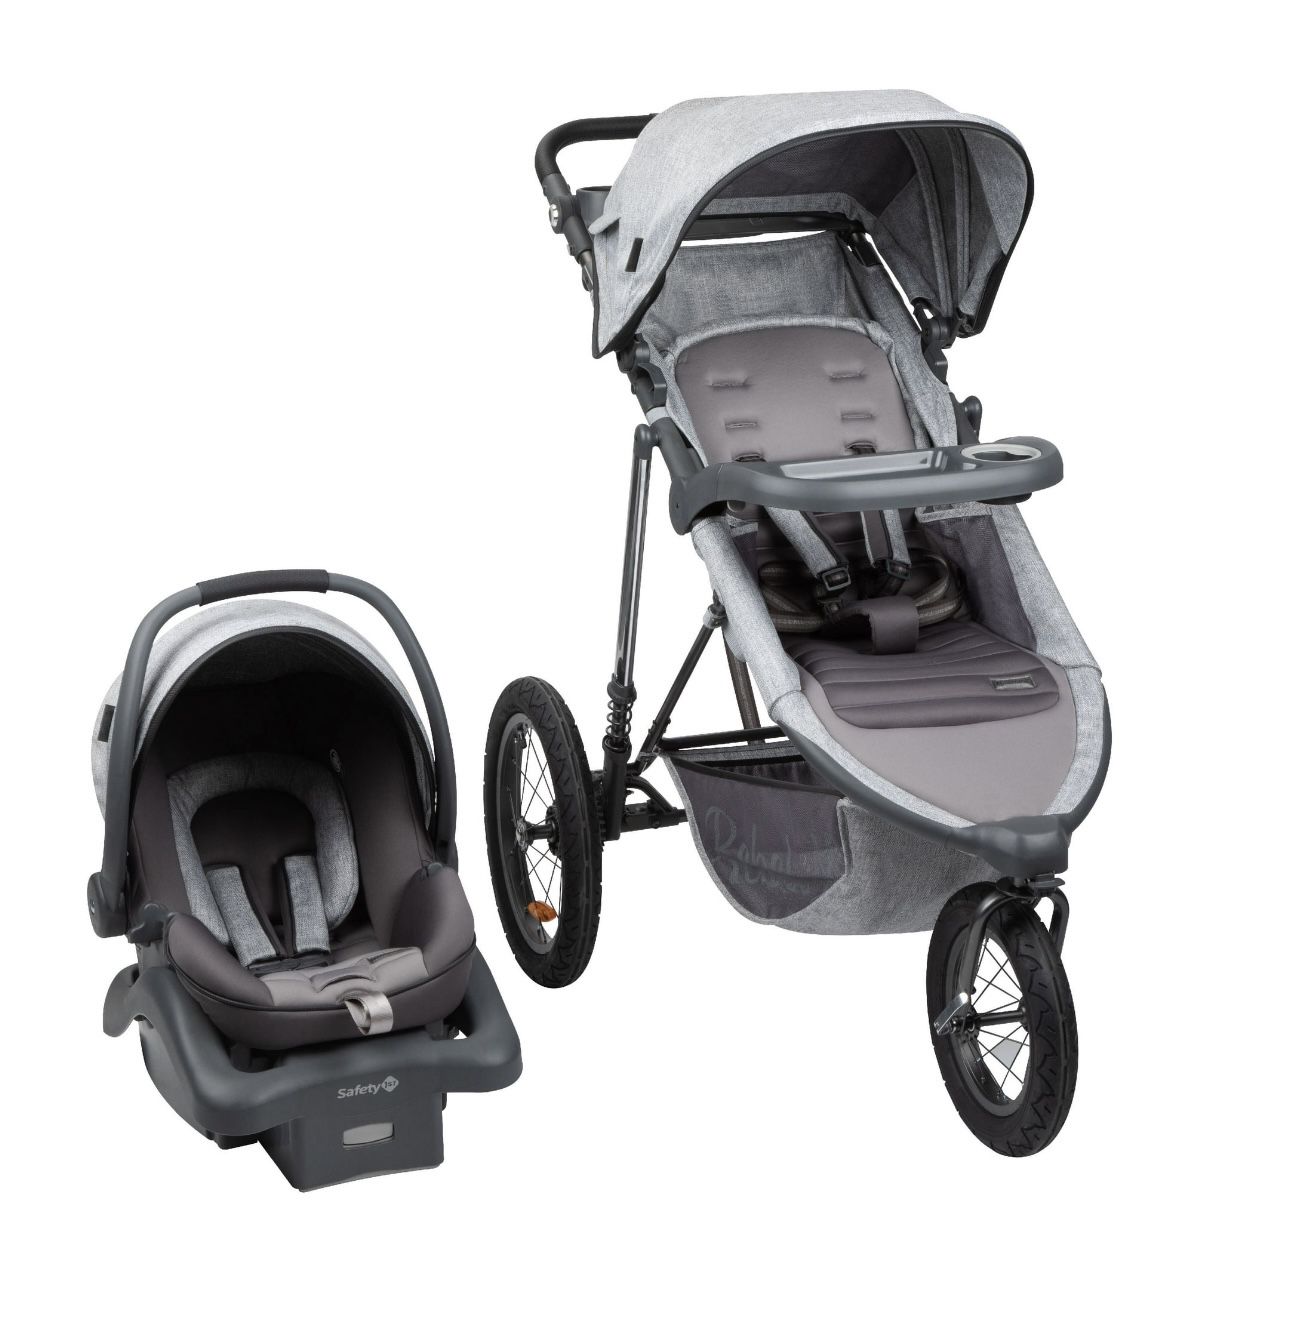 EXCELLENT CONDITION - Monbebe Rebel II  All in One Travel System Stroller with Rear-Facing Infant Car Seat, Soho